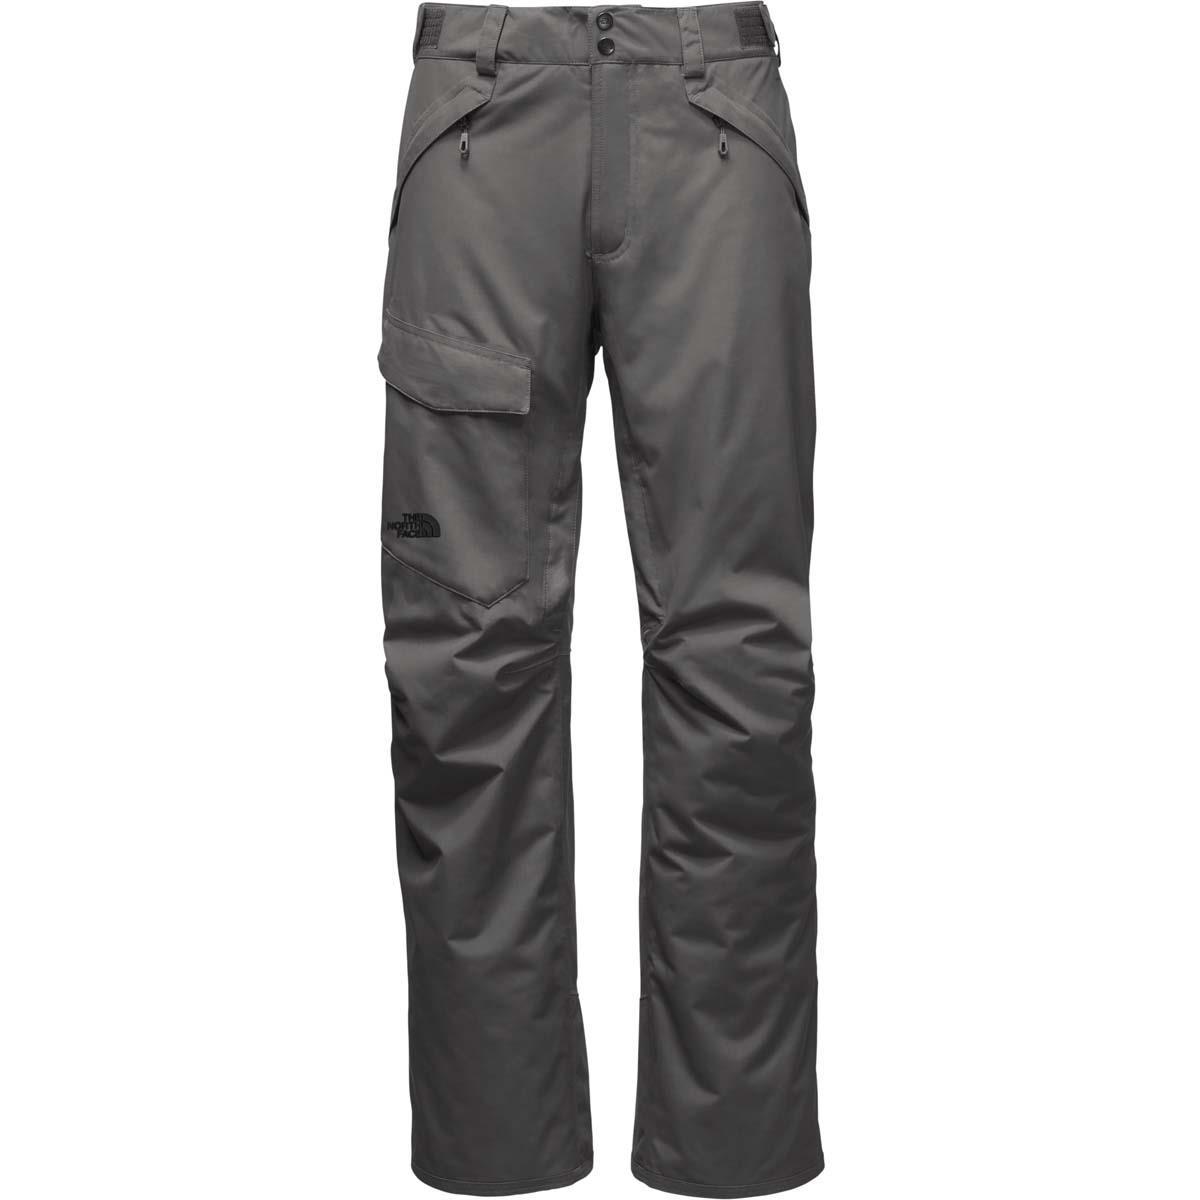 north face fleece lined pants